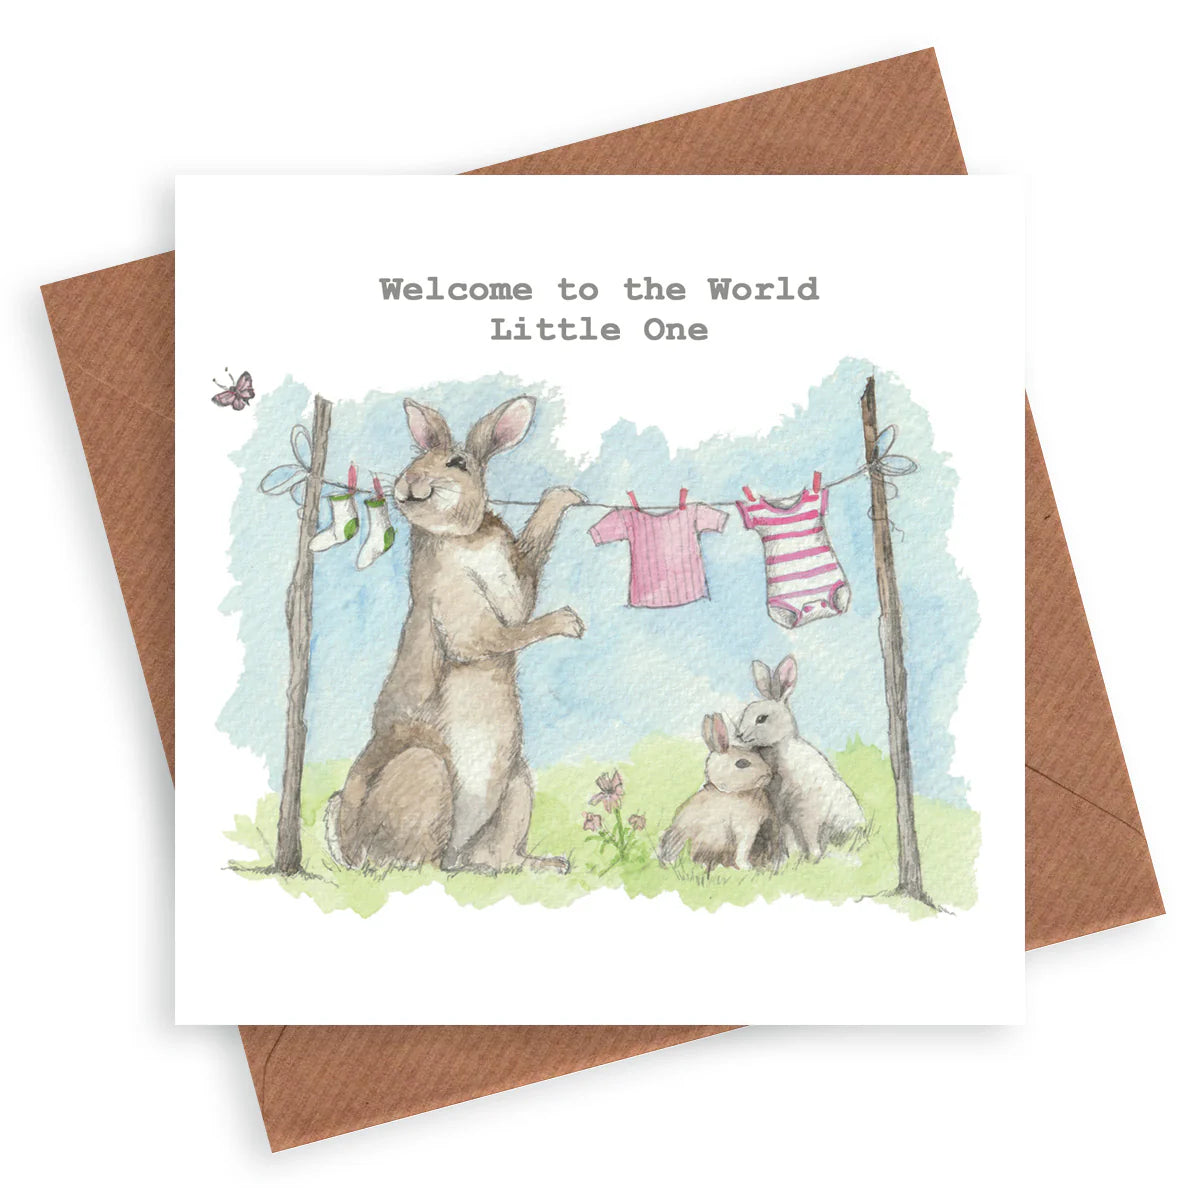 Fabulous Gifts Crumble & Core Welcome To The World Baby Girl Card by Weirs of Baggot Street